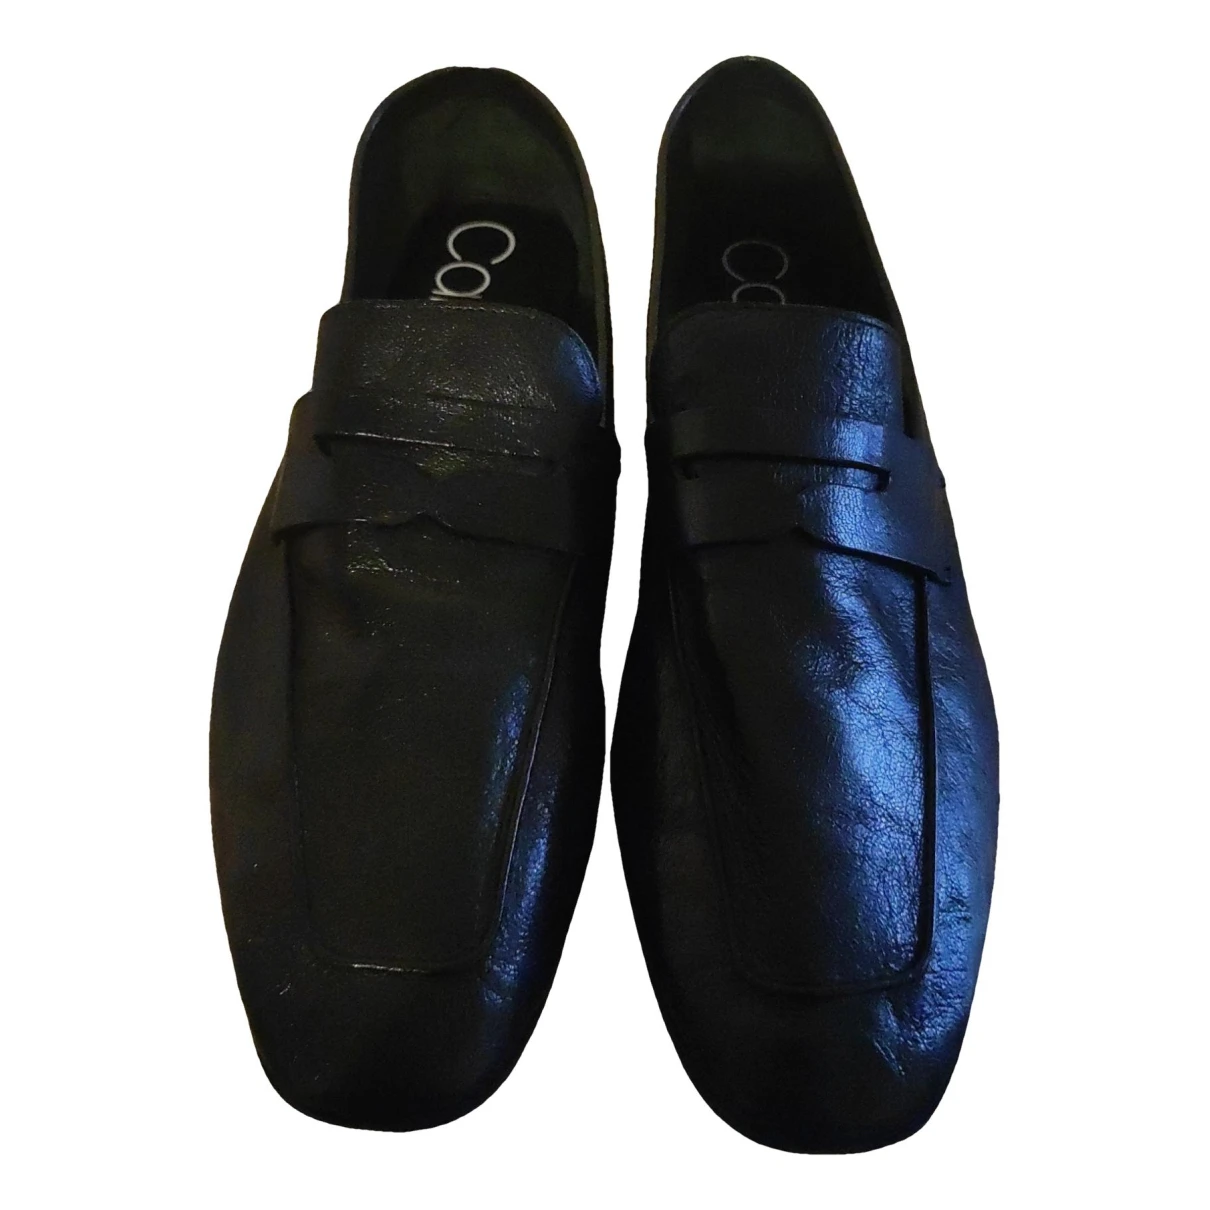 Pre-owned Calvin Klein Leather Flats In Black